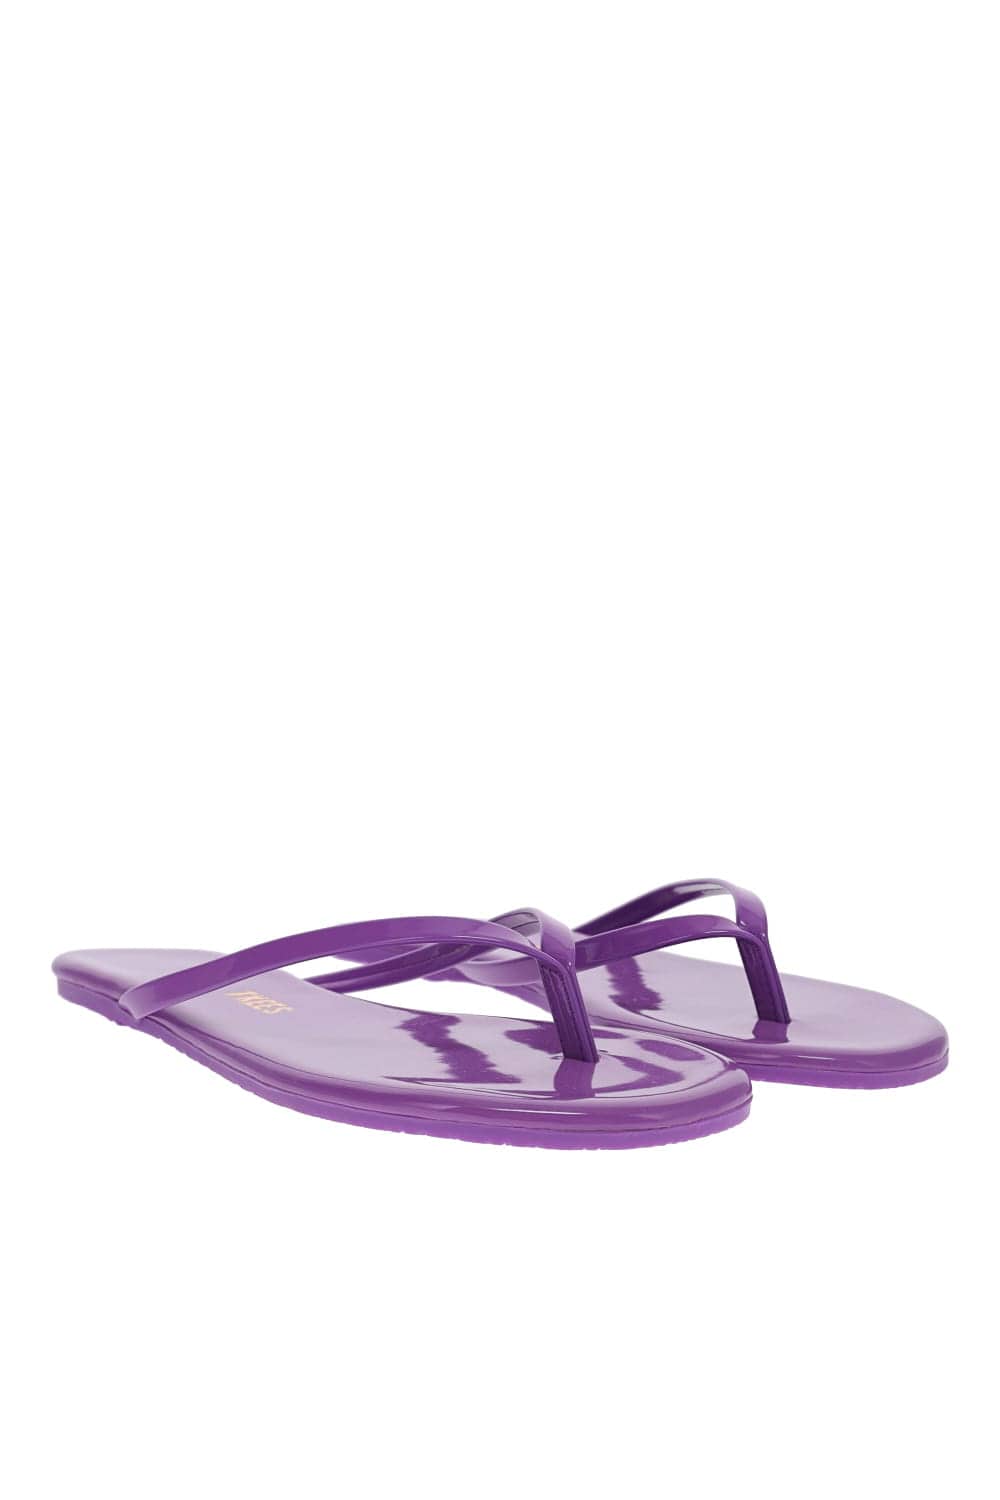 TKEES Lily Patent Solids LILP-01 Bright Lavendar